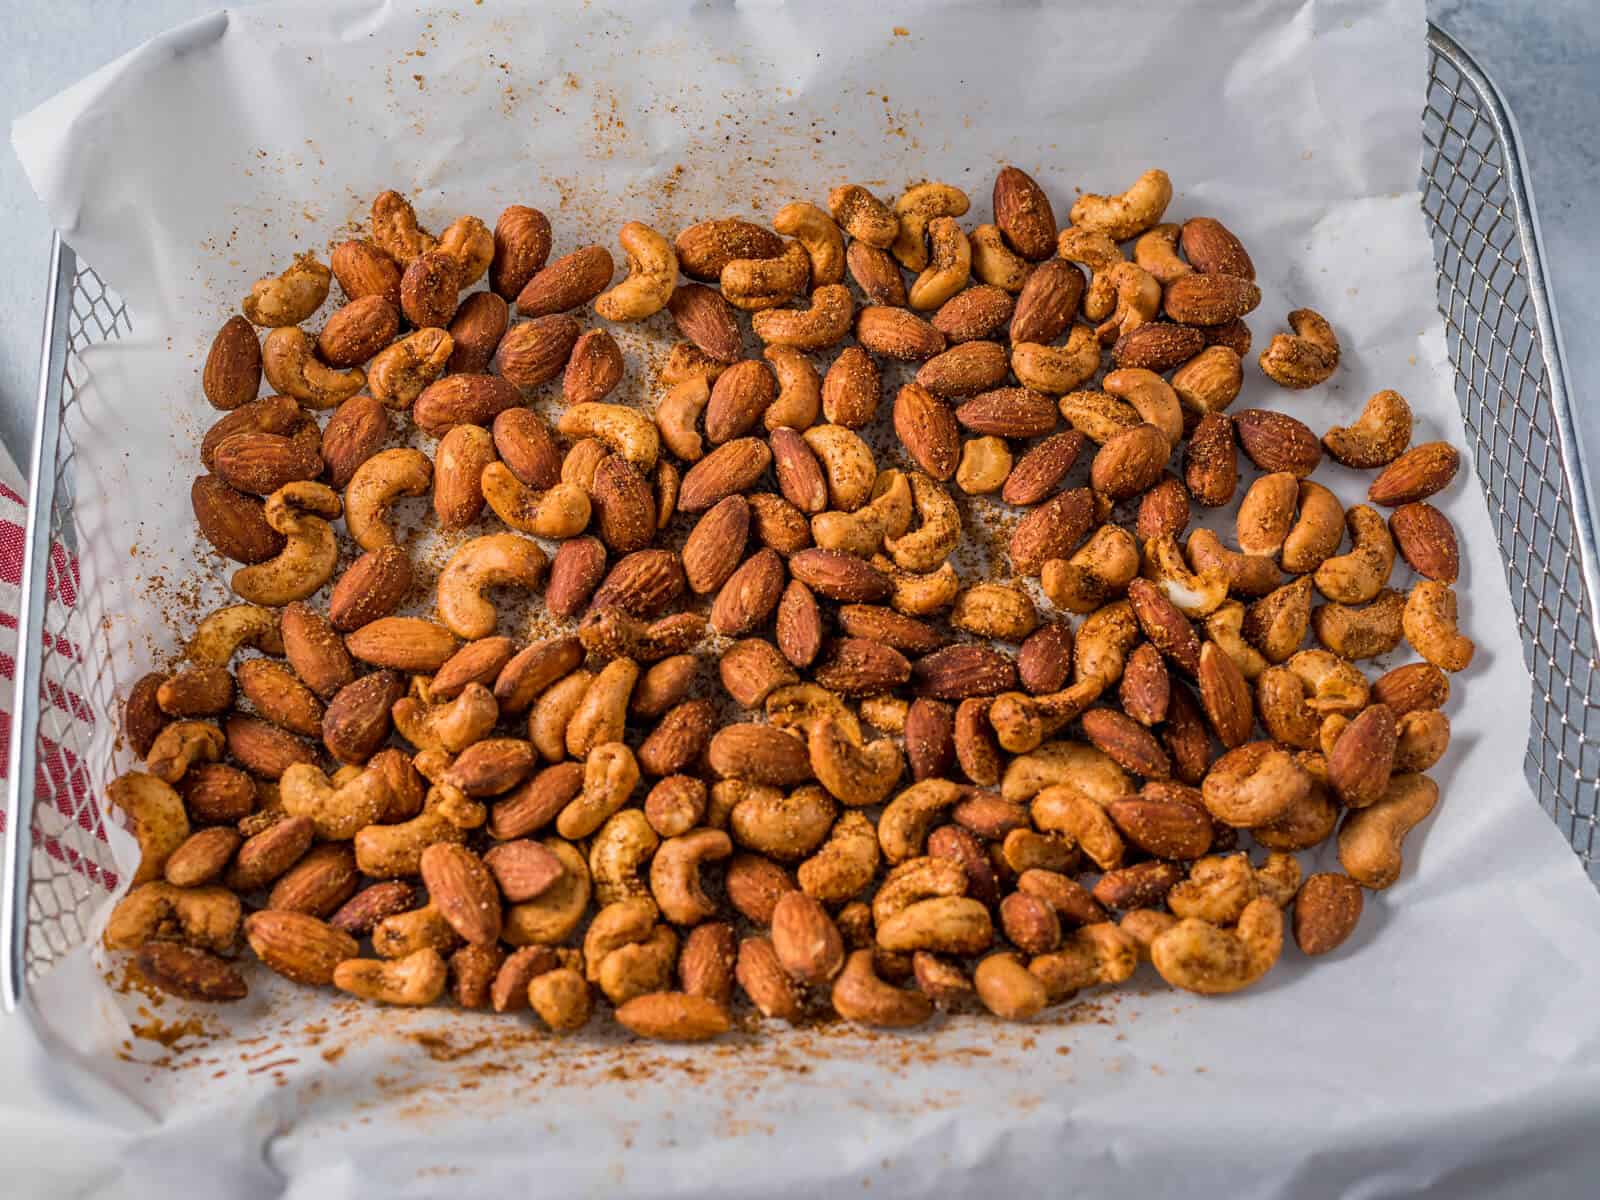 roasted spiced nuts in a tray